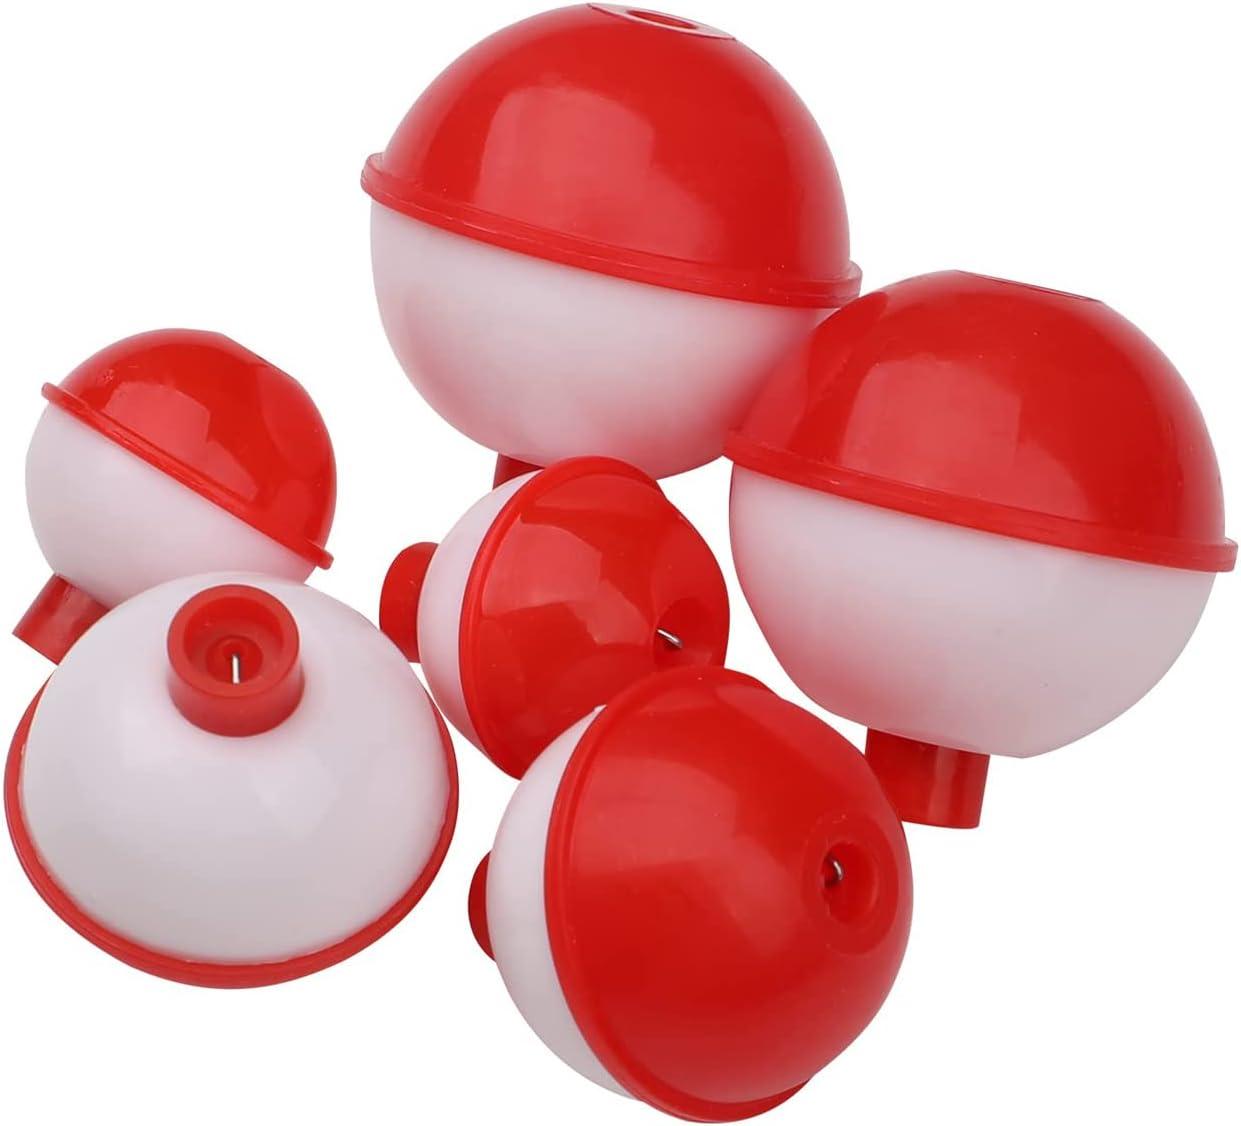 12 FISHING BOBBERS Round Floats 3/4 RED & WHITE! SNAP ON #07130